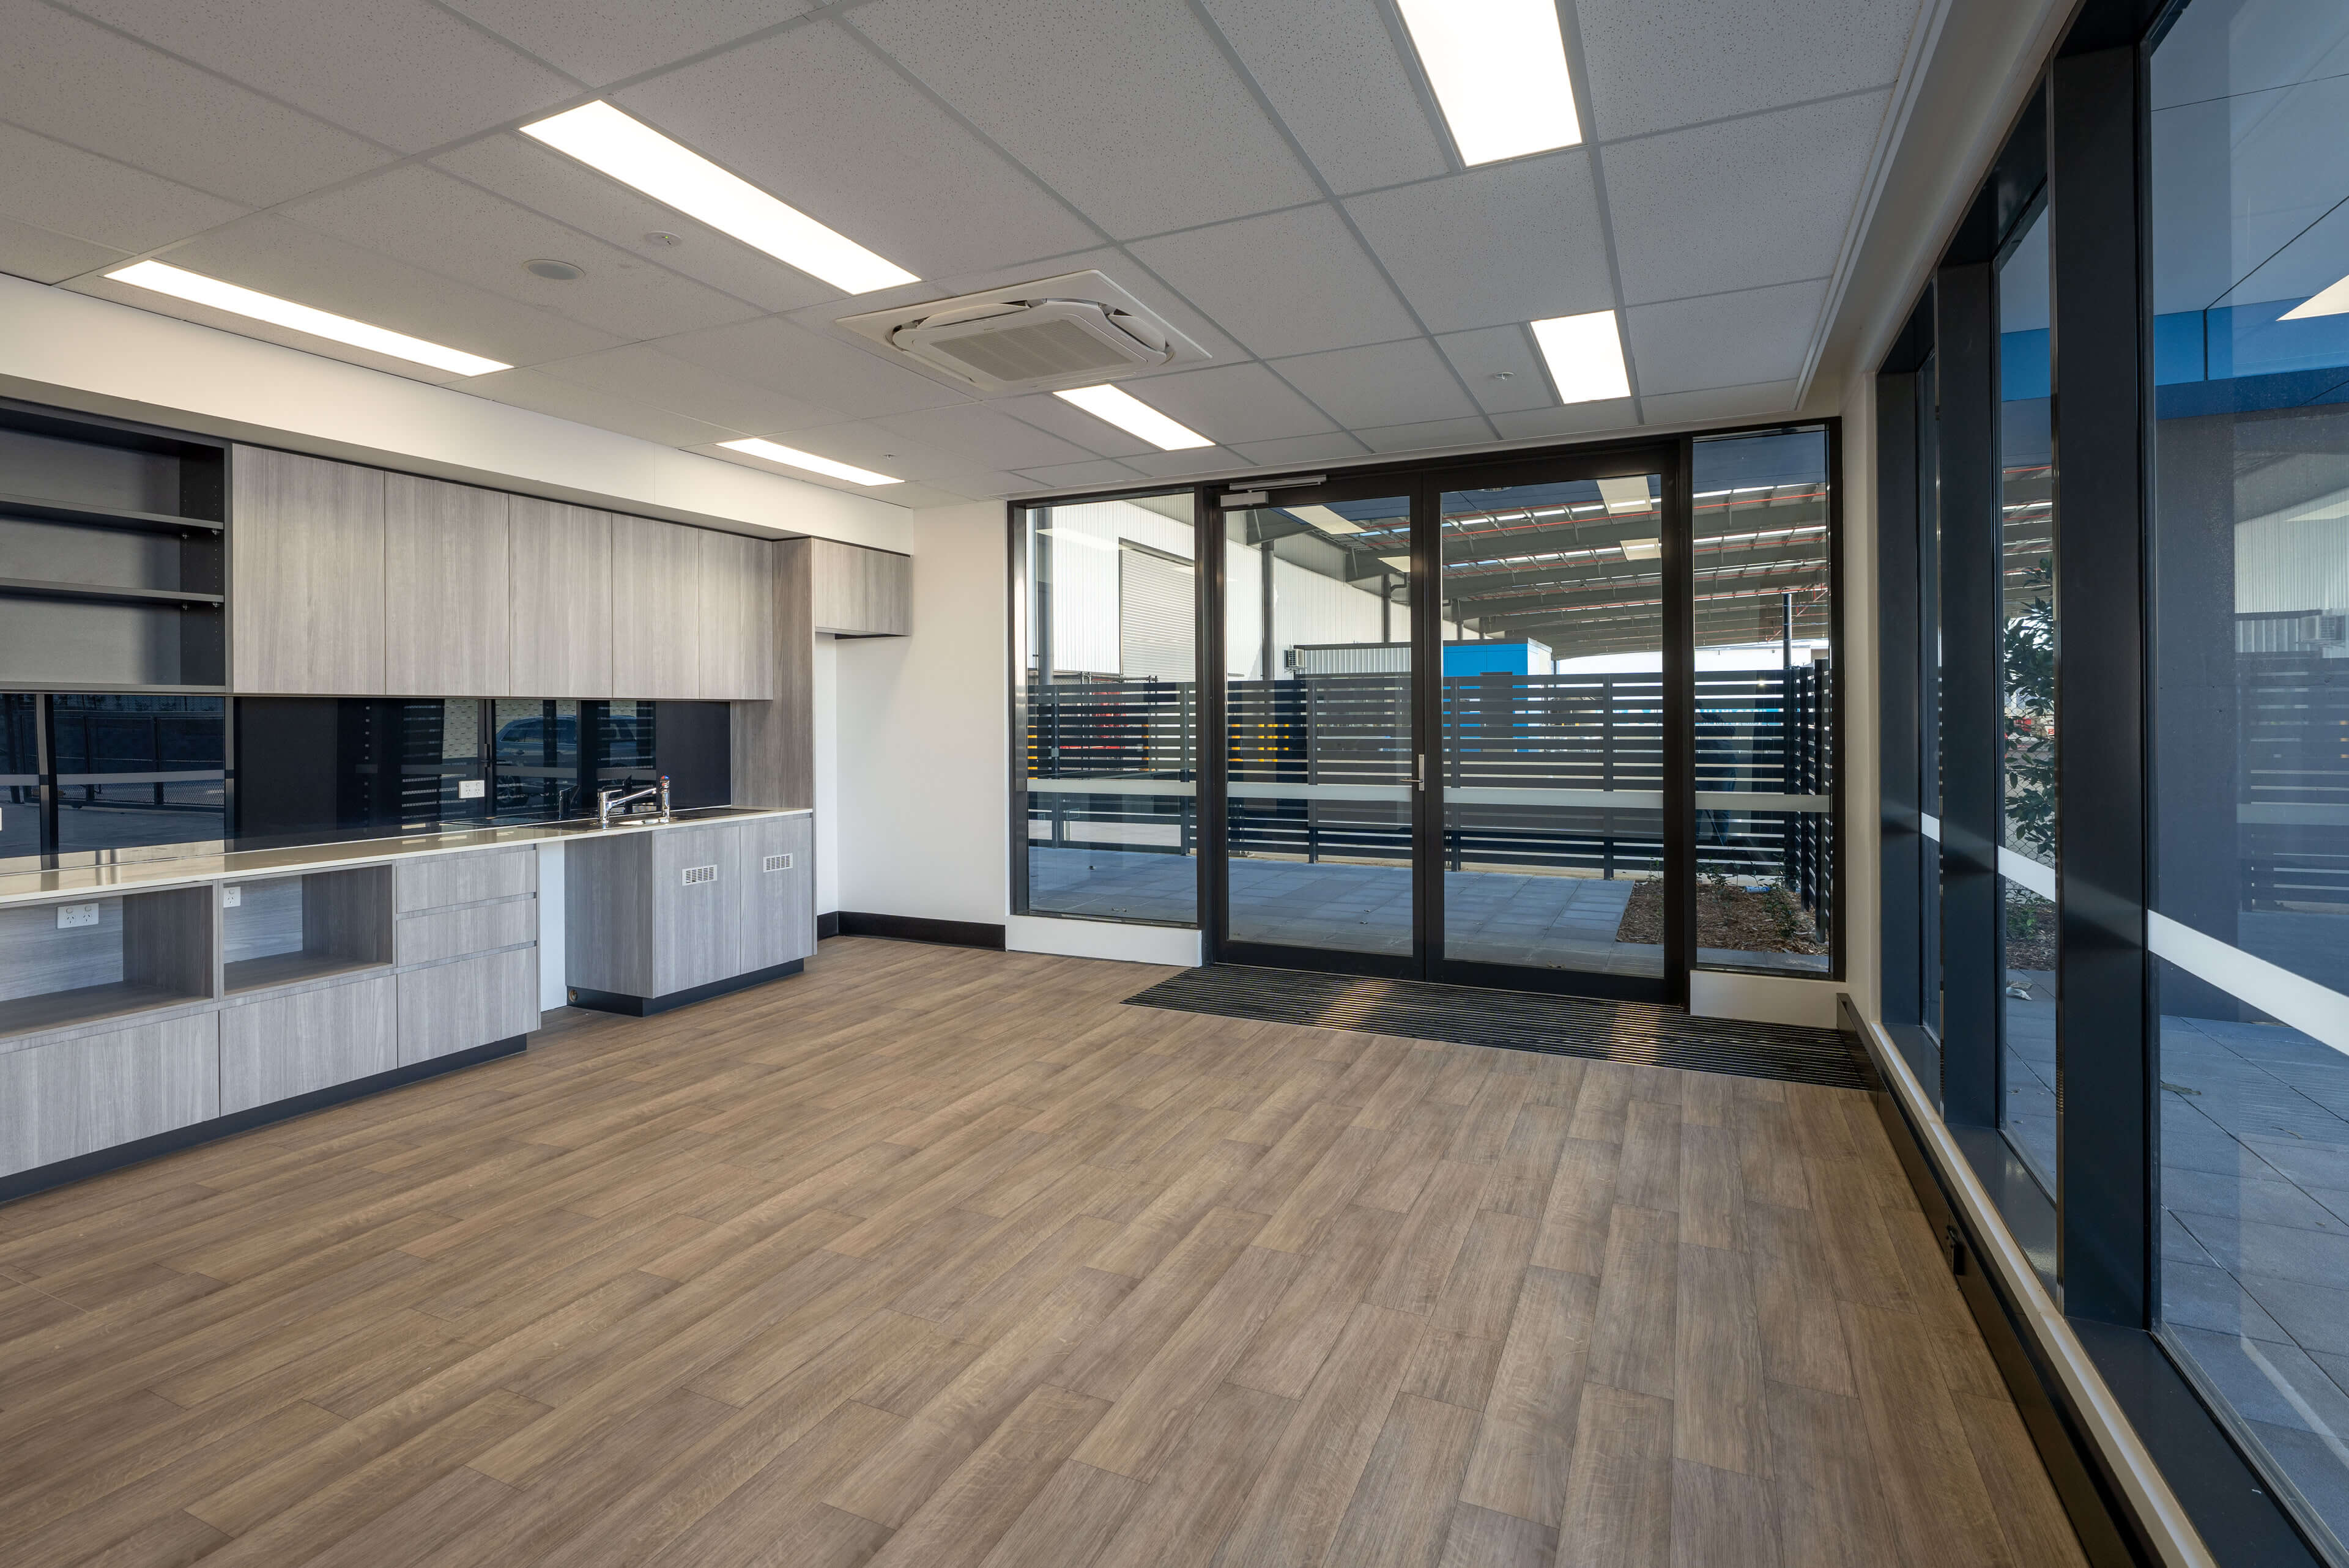 14 kitchen and outside area of commercial space at building 2 wetherill park taylor construction industrial